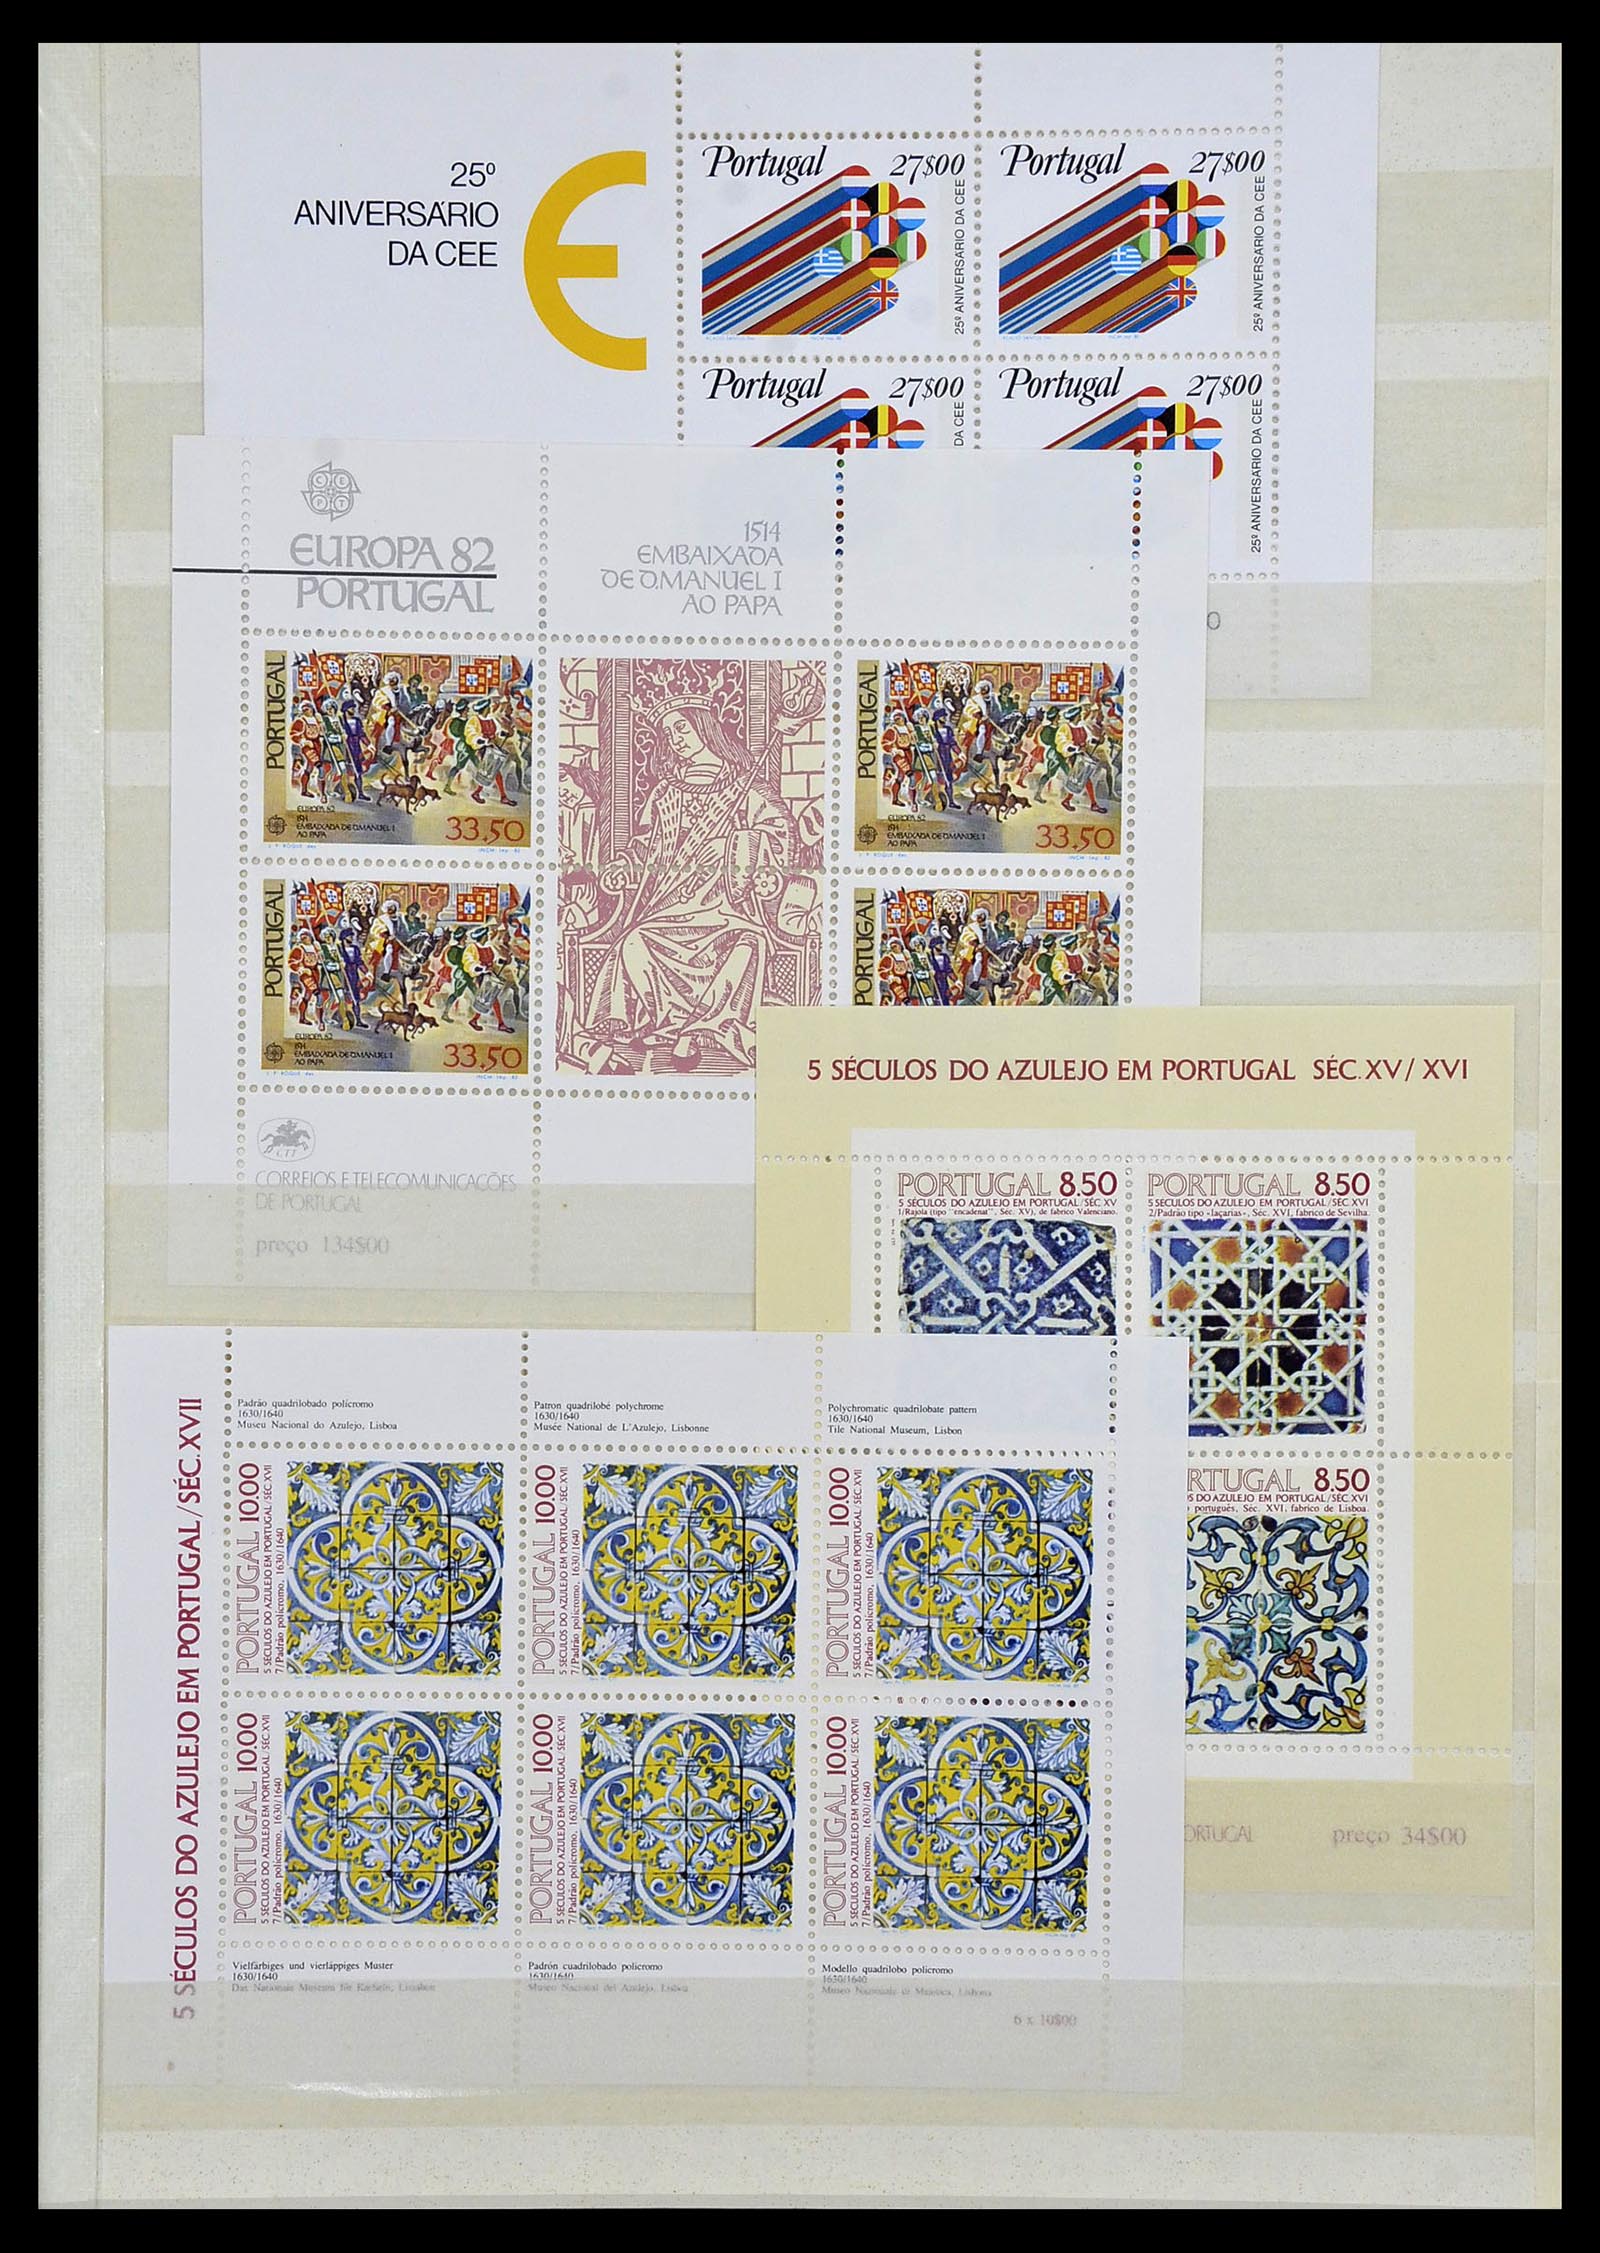 34045 011 - Stamp collection 34045 Western Europe souvenir sheets 1973-1986.